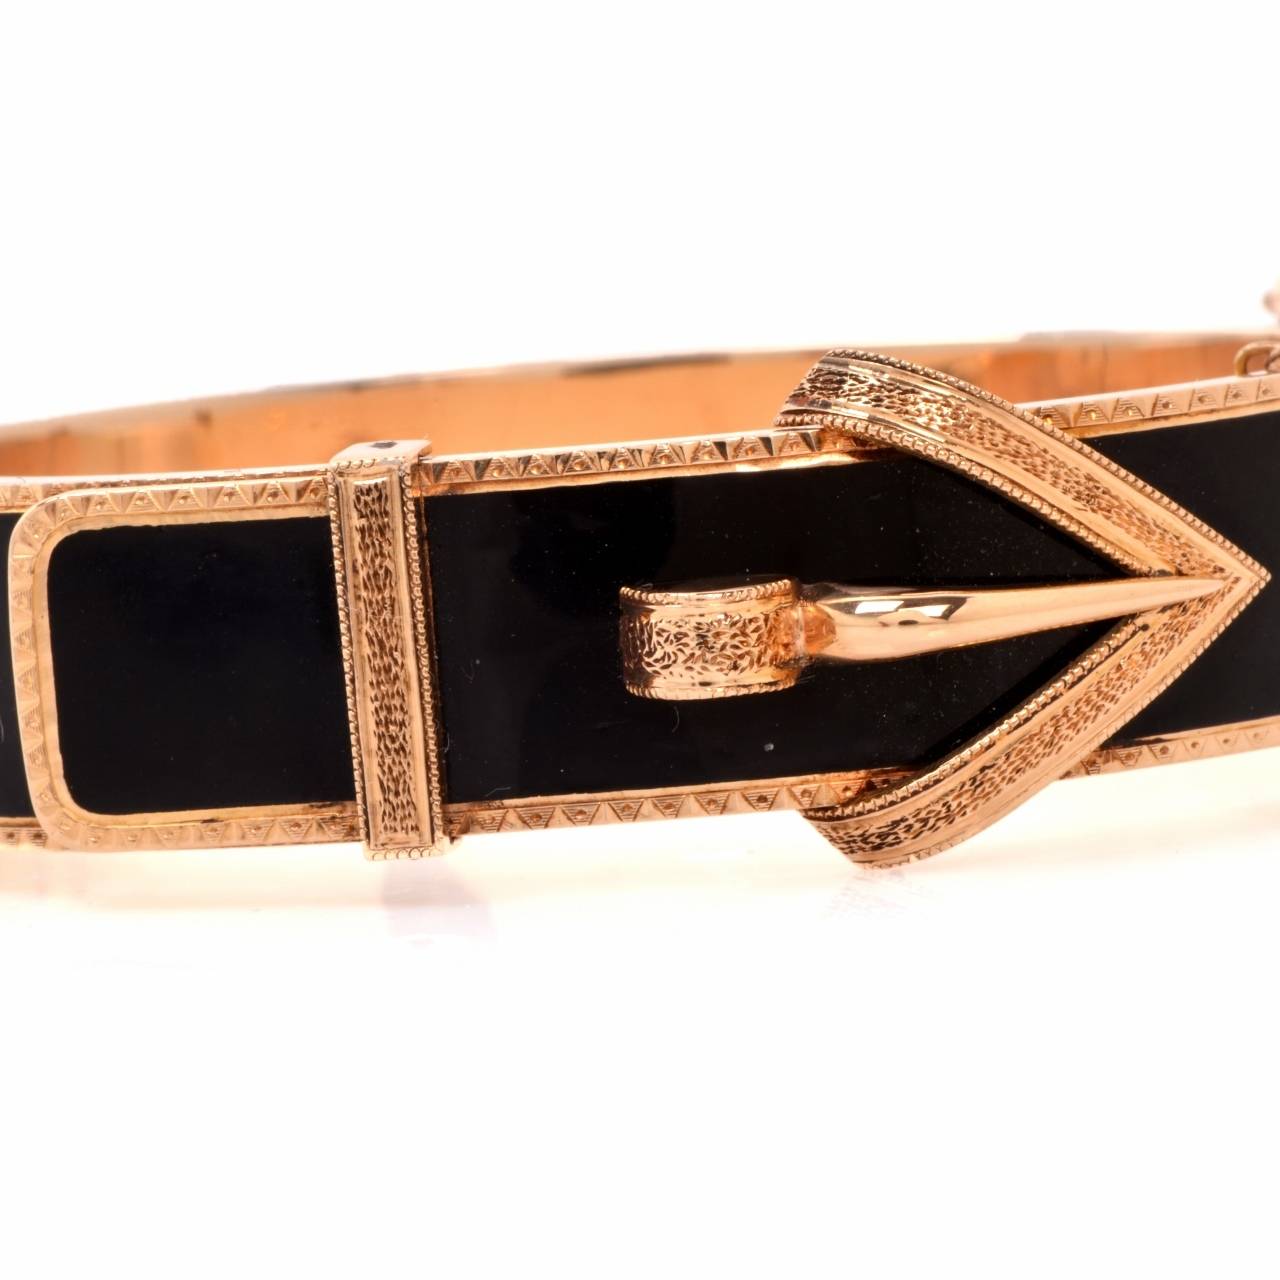 This gorgeous Antique belt buckle bangle bracelet is crafted in solid 14 K yellow gold metal. Showcasing a stylish and feminine belt buckle design that is covered with black enamel.  With a security insert clasp, this bracelet remains in very good